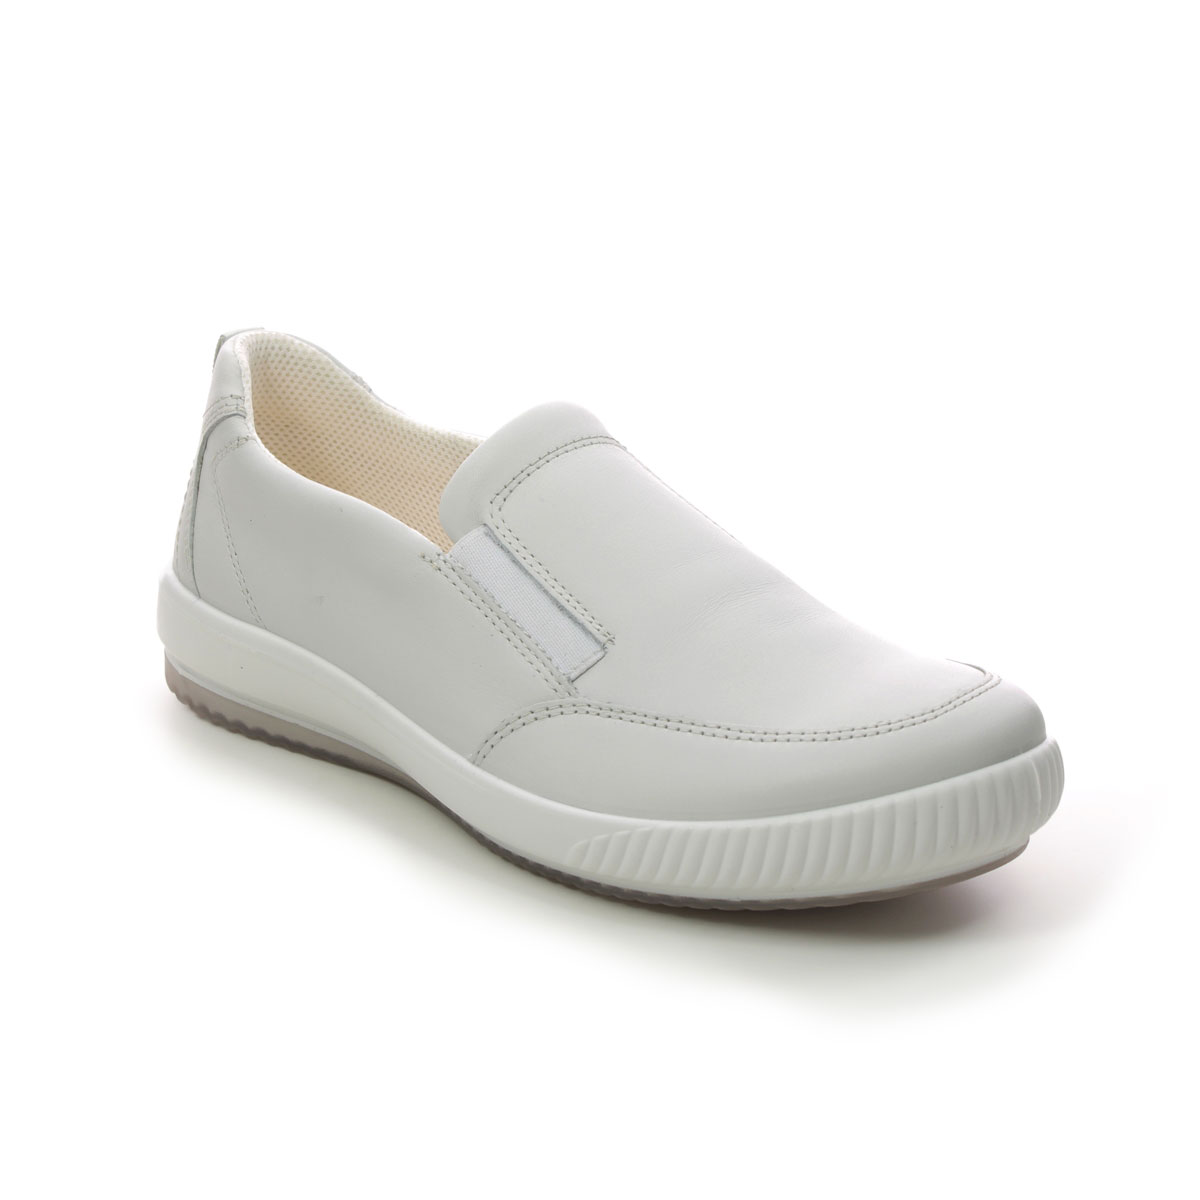 Legero Tanaro 5 Slip WHITE LEATHER Womens Comfort Slip On Shoes 2000215-1000 in a Plain Leather in Size 5.5